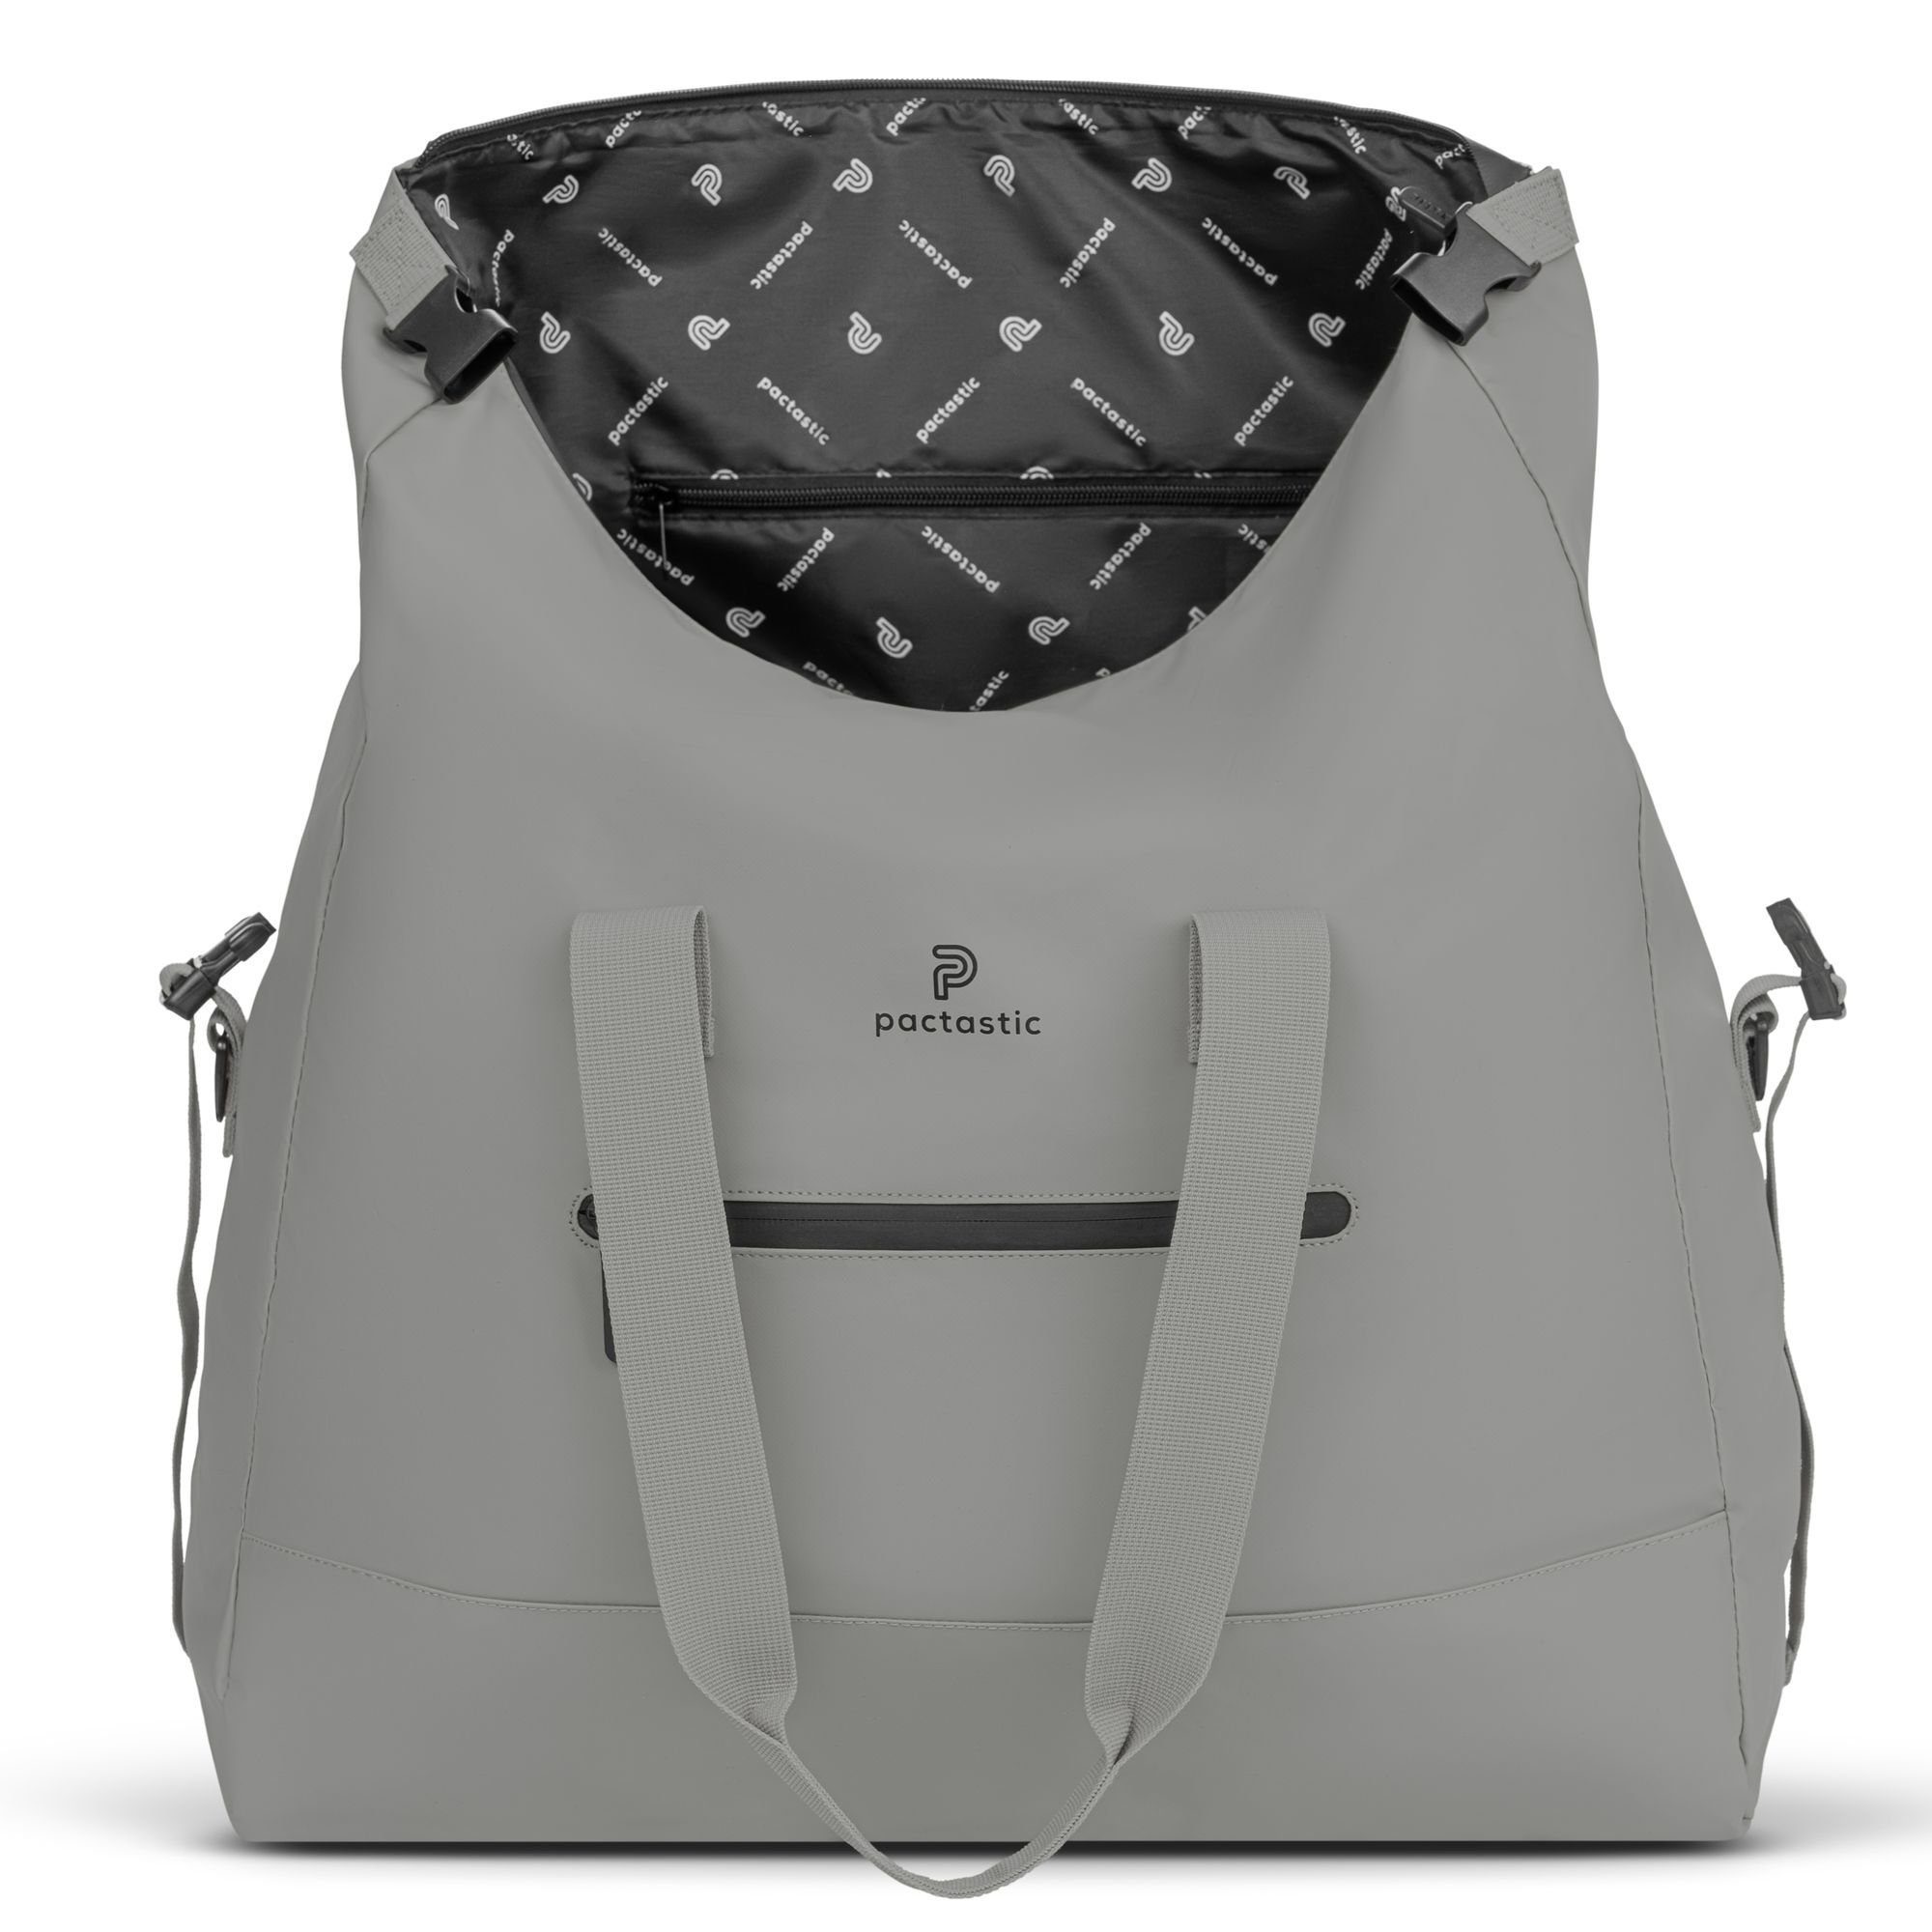 Urban Weekender Veganes Pactastic grey Tech-Material Collection,